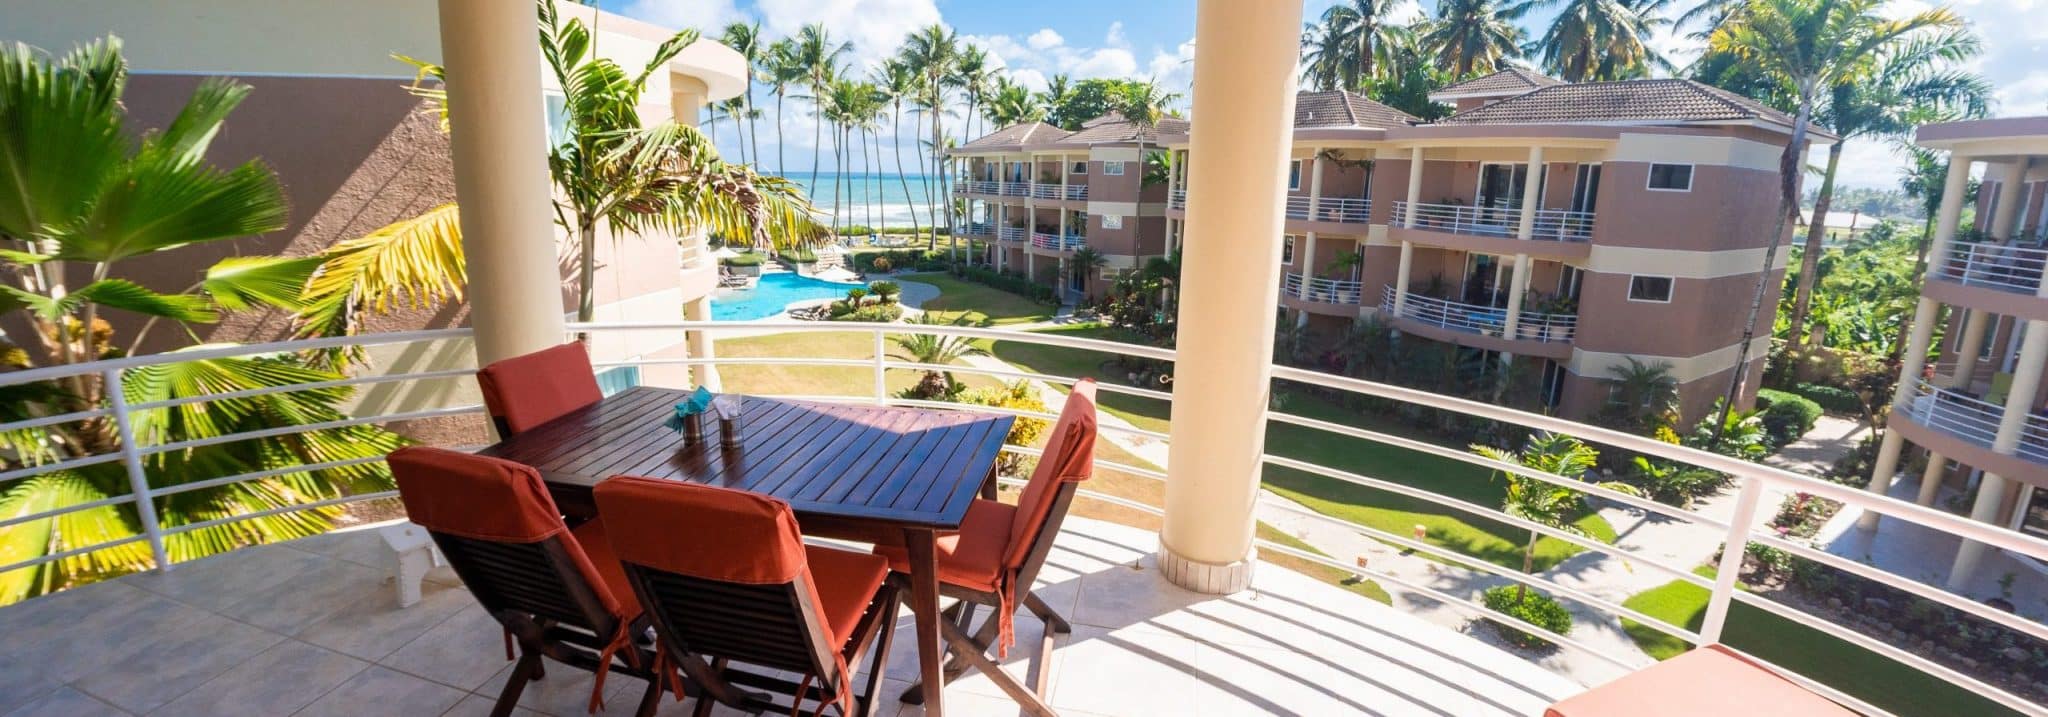 Rare spacious 3-Bedroom Penthouse In The Coast with Vaulted Ceilings!